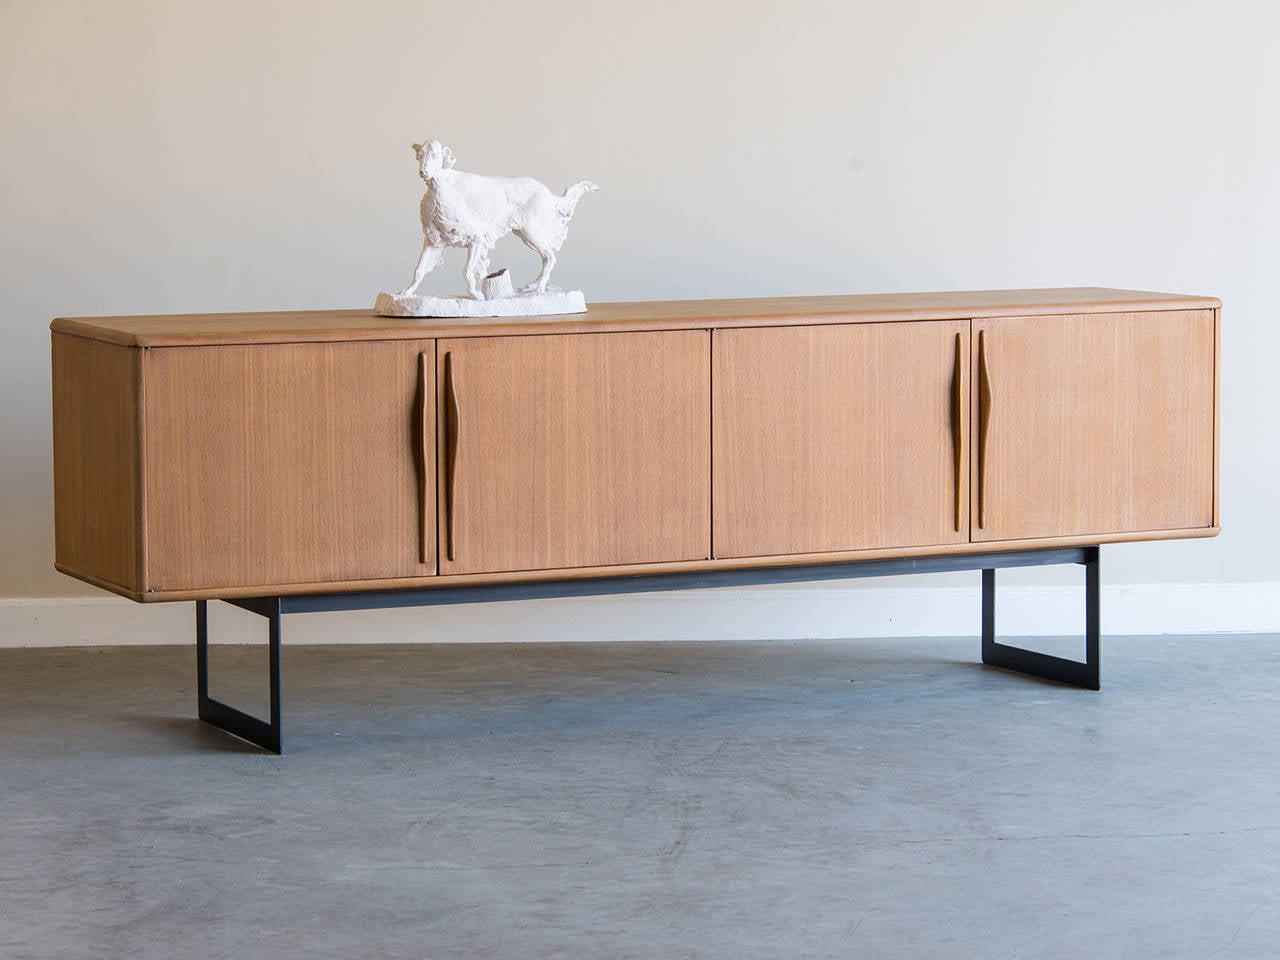 Vintage pale mahogany buffet, Mid-Century France, circa 1960. The marvelous colour of this Danish design buffet is the result of removing the old stained finish for a fresh appearance. The elegant restraint in the design with four cabinet doors that